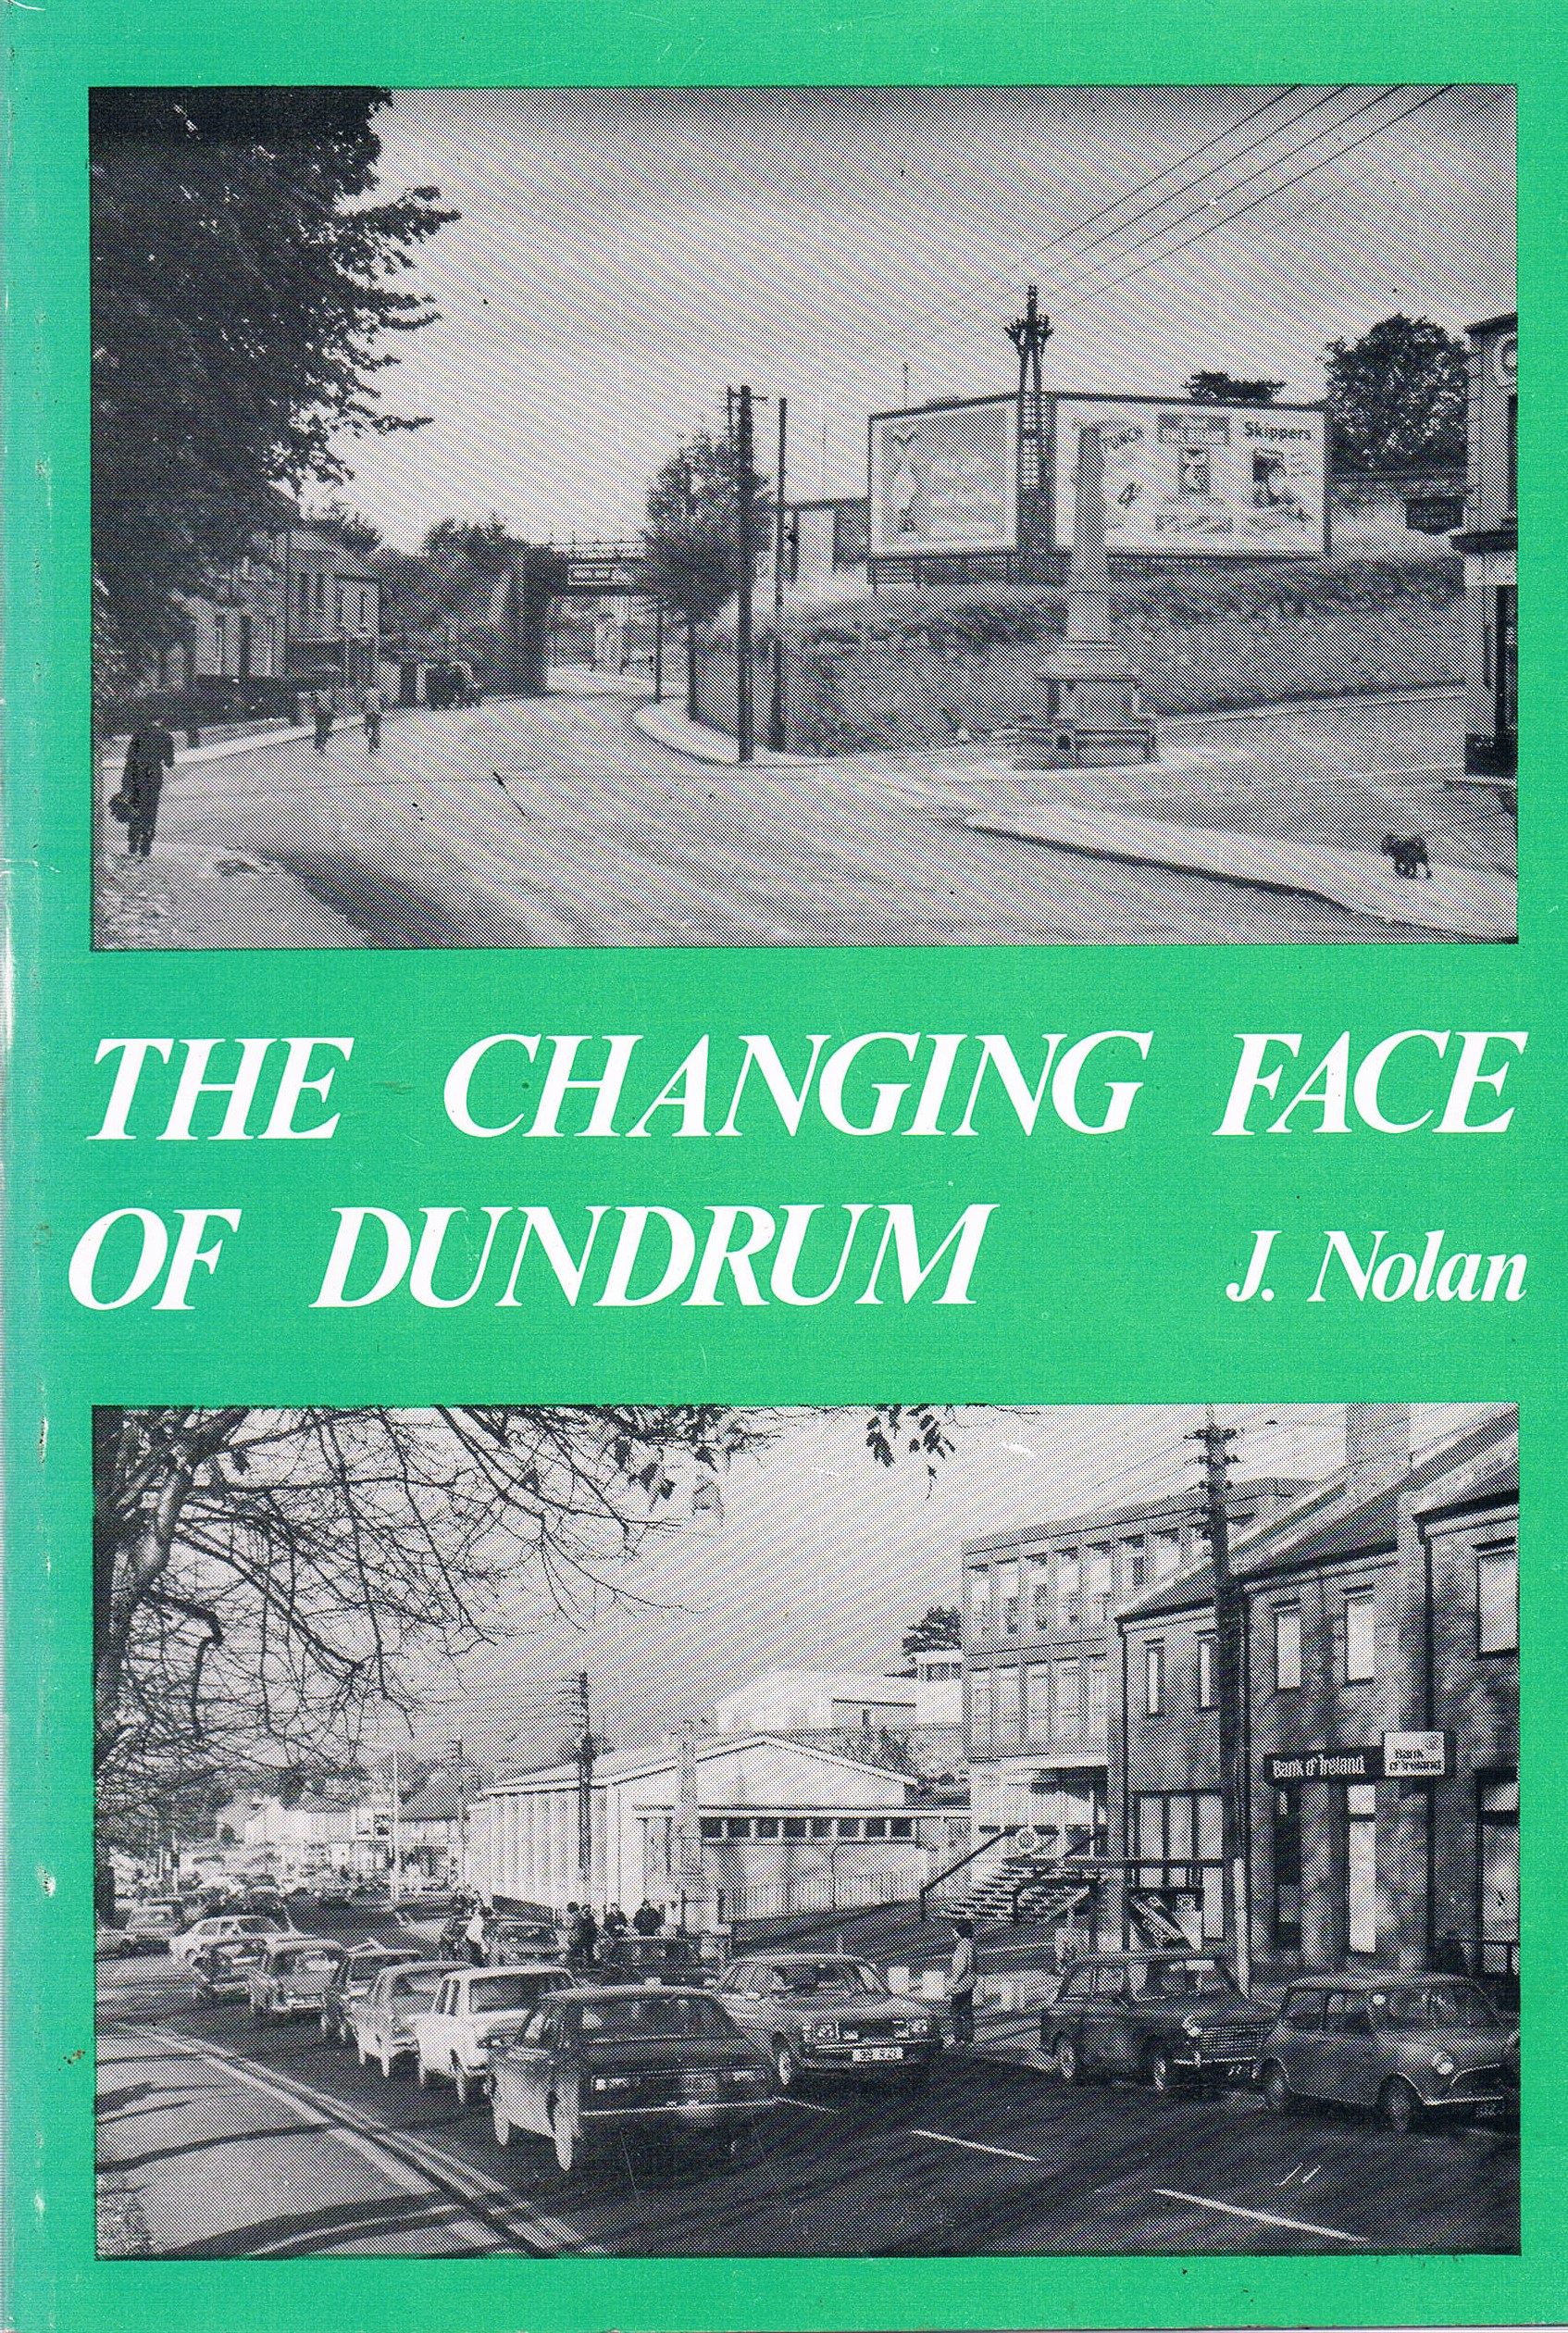 The Changing Face of Dundrum | J. Nolan | Charlie Byrne's